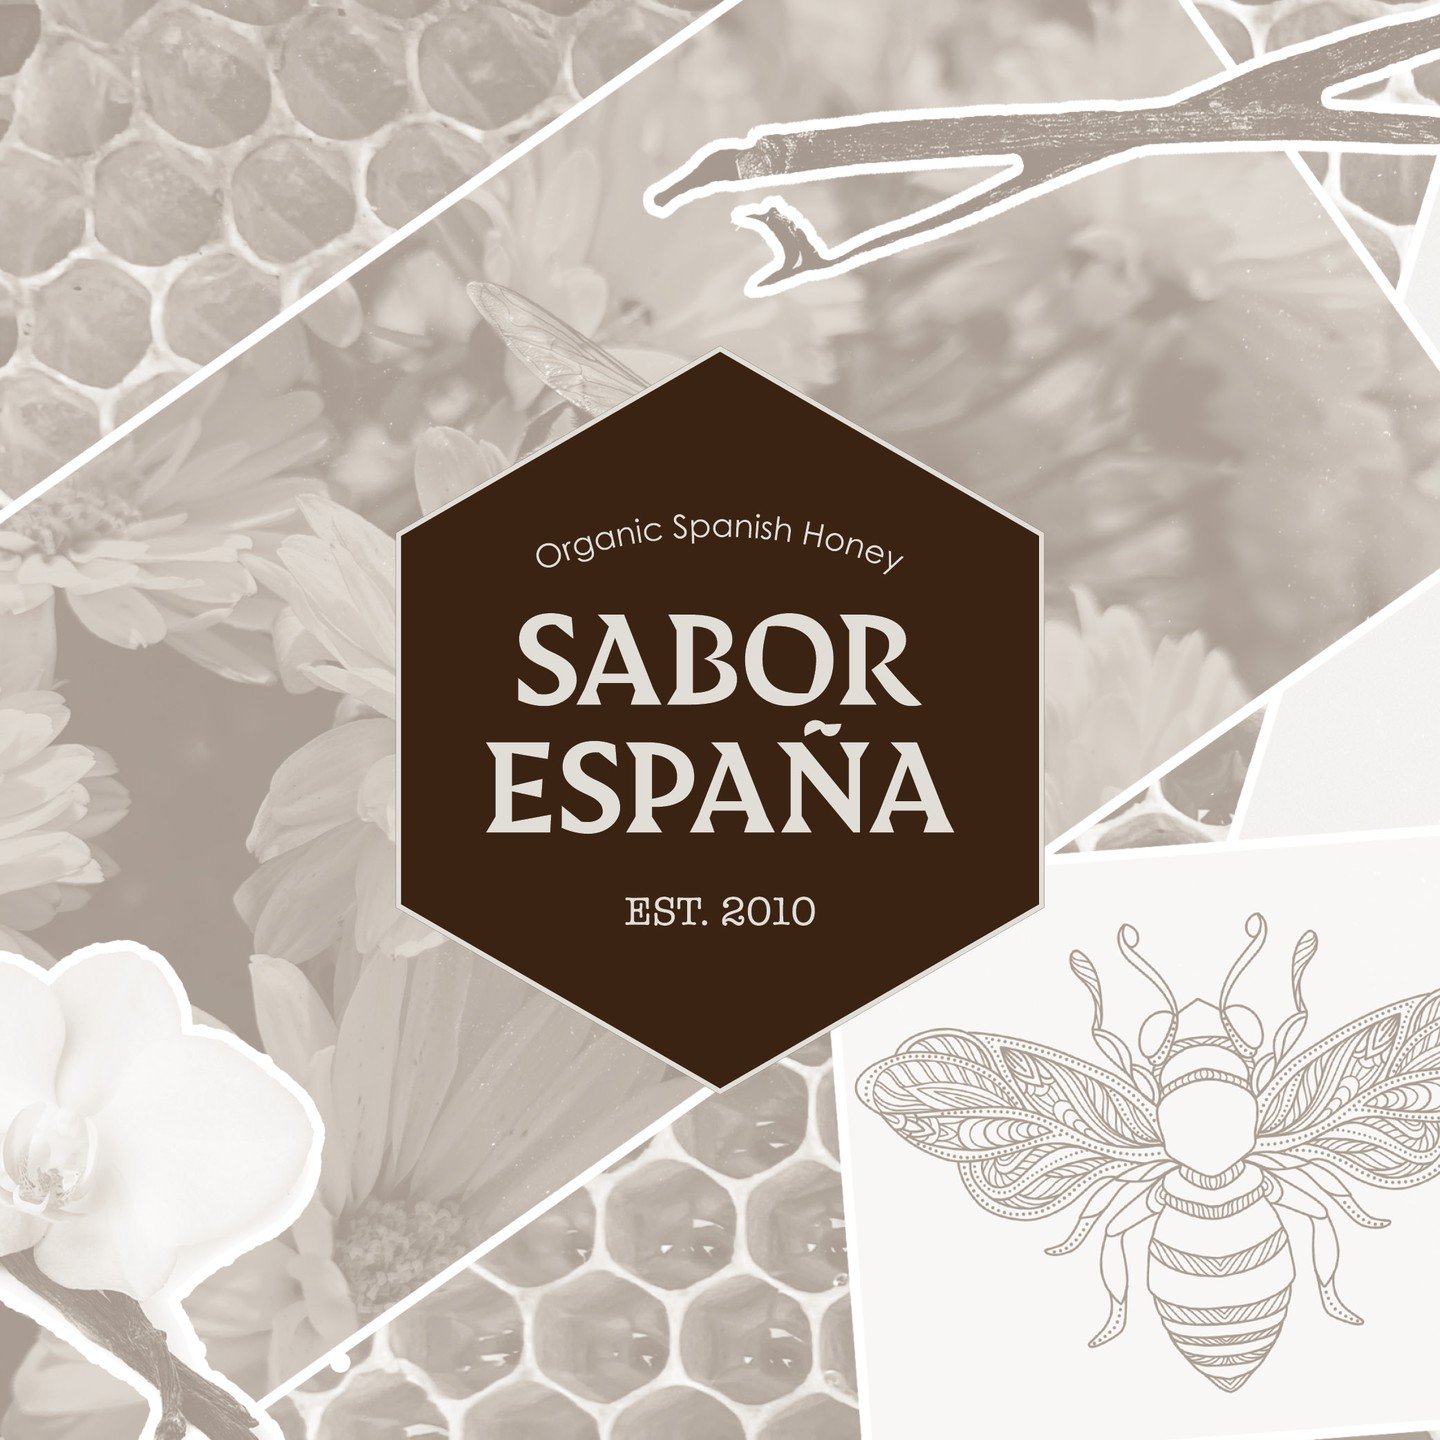 My entry for @lets.brief:

Sabor Espana was founded by Julia and her sister Valentina in southern Spain. The shop specialises in the highest-quality of honey and they want to get their product to a wider market creating a brand that people can trust.